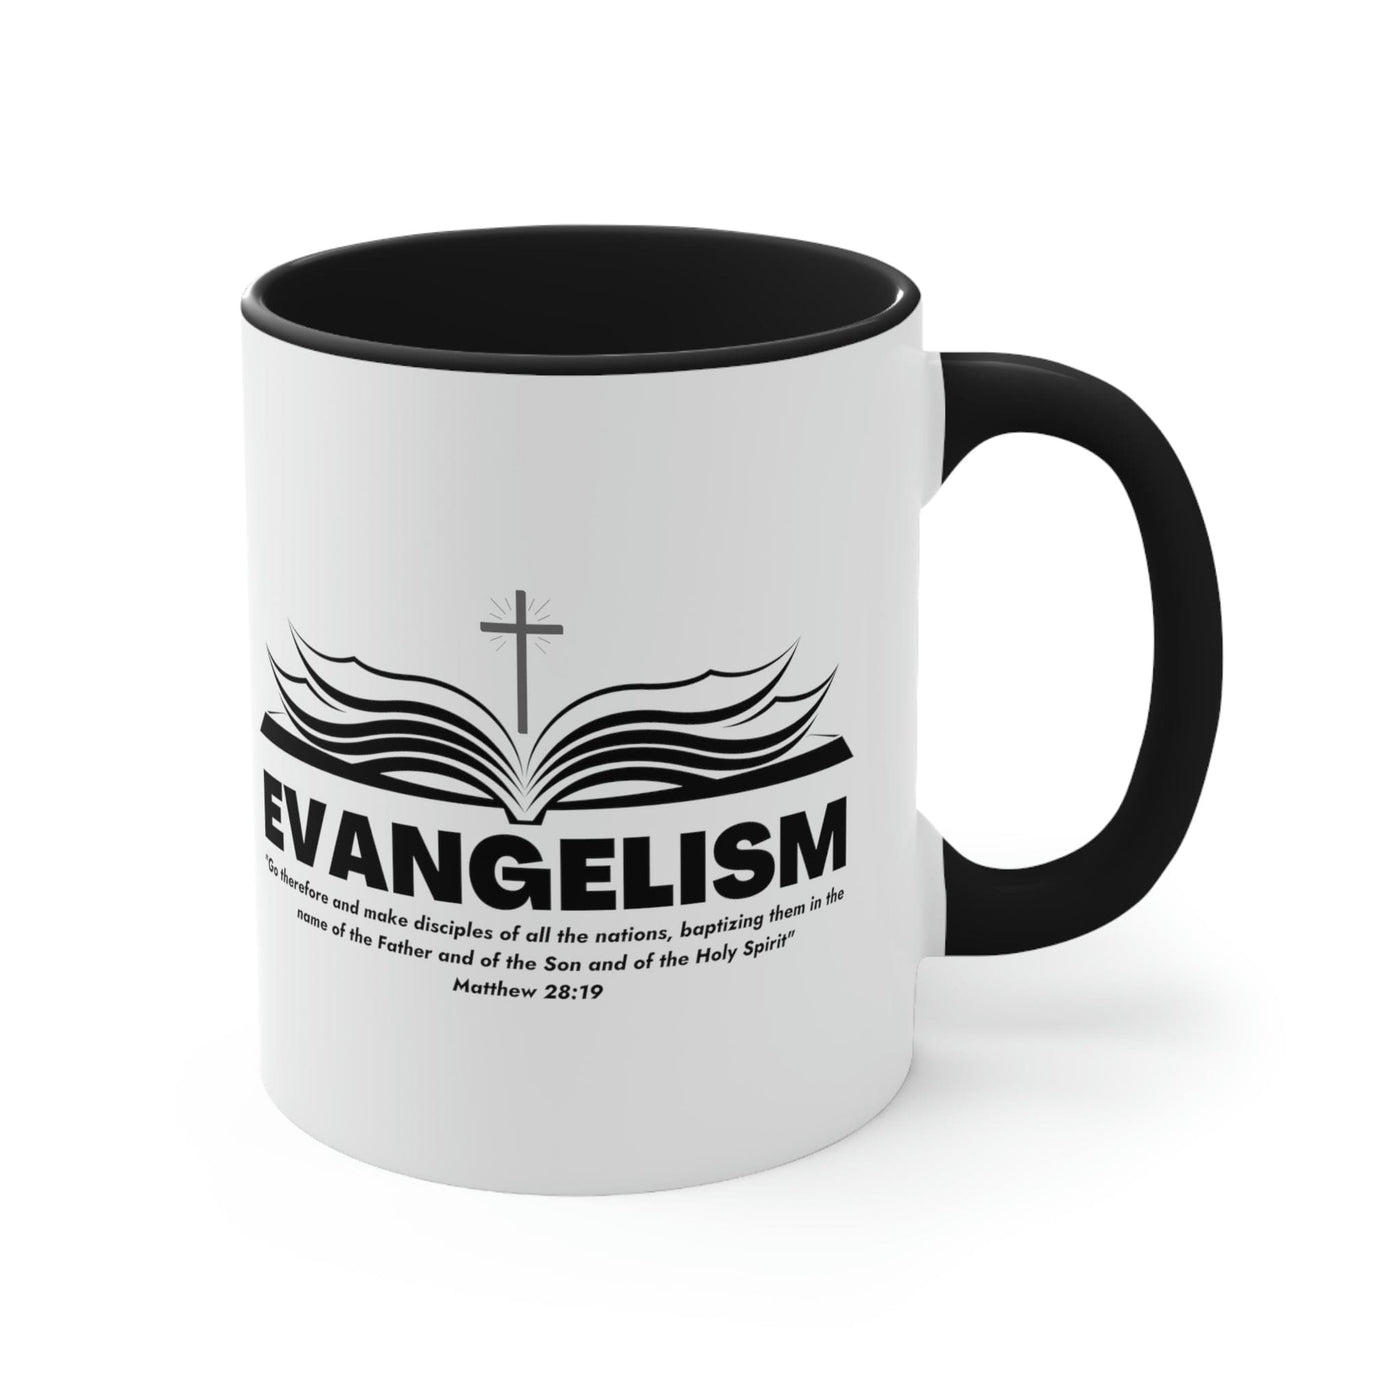 Two-tone Accent Ceramic Mug 11oz Evangelism - Go Therefore And Make Disciples